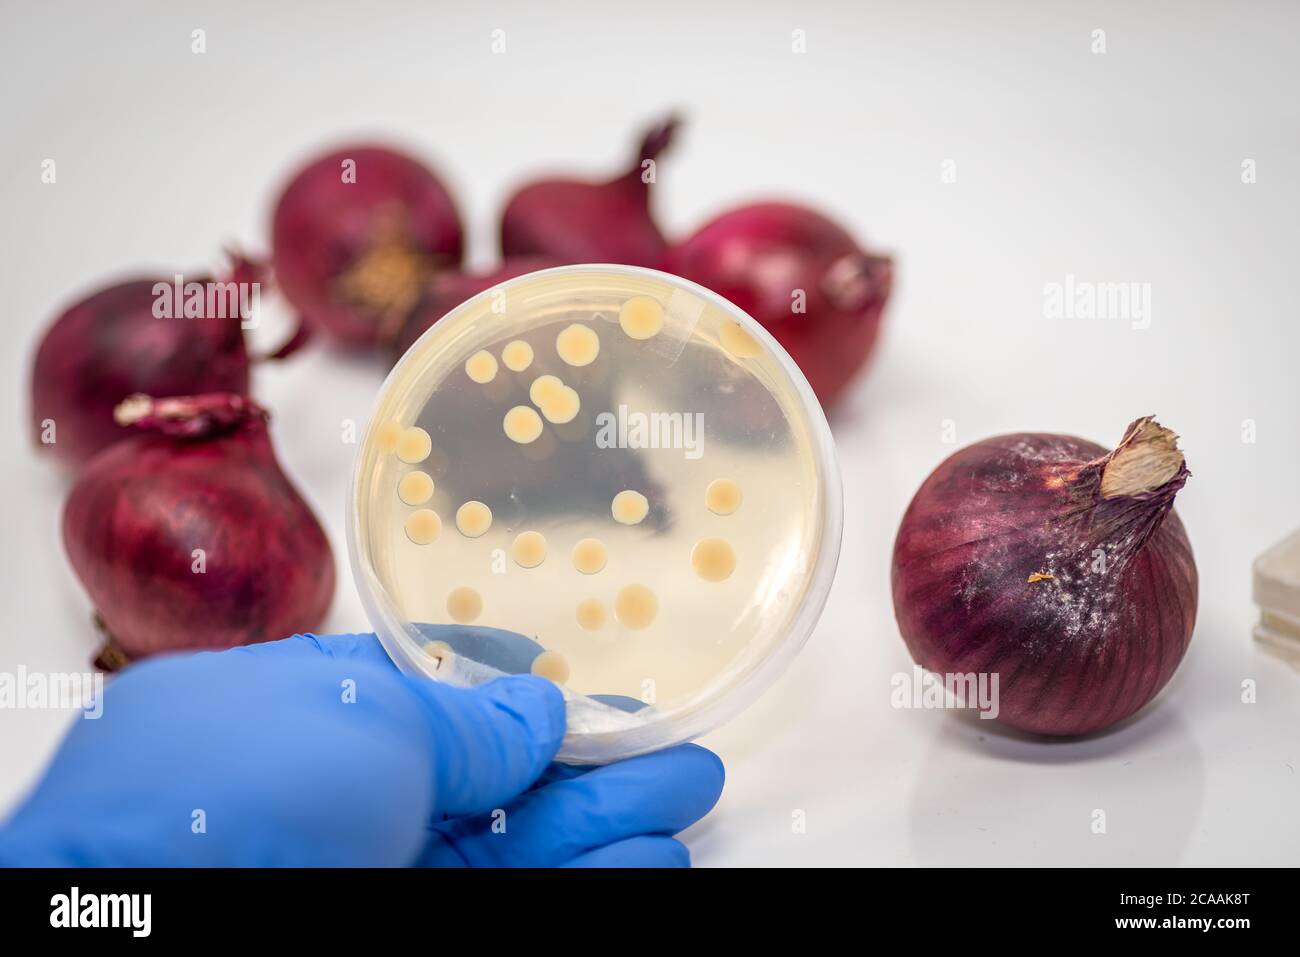 Pathogenic E coli/ Salmonella contamination in red onion, culture plate showing bacterial colony isolated from contaminated red onion Stock Photo